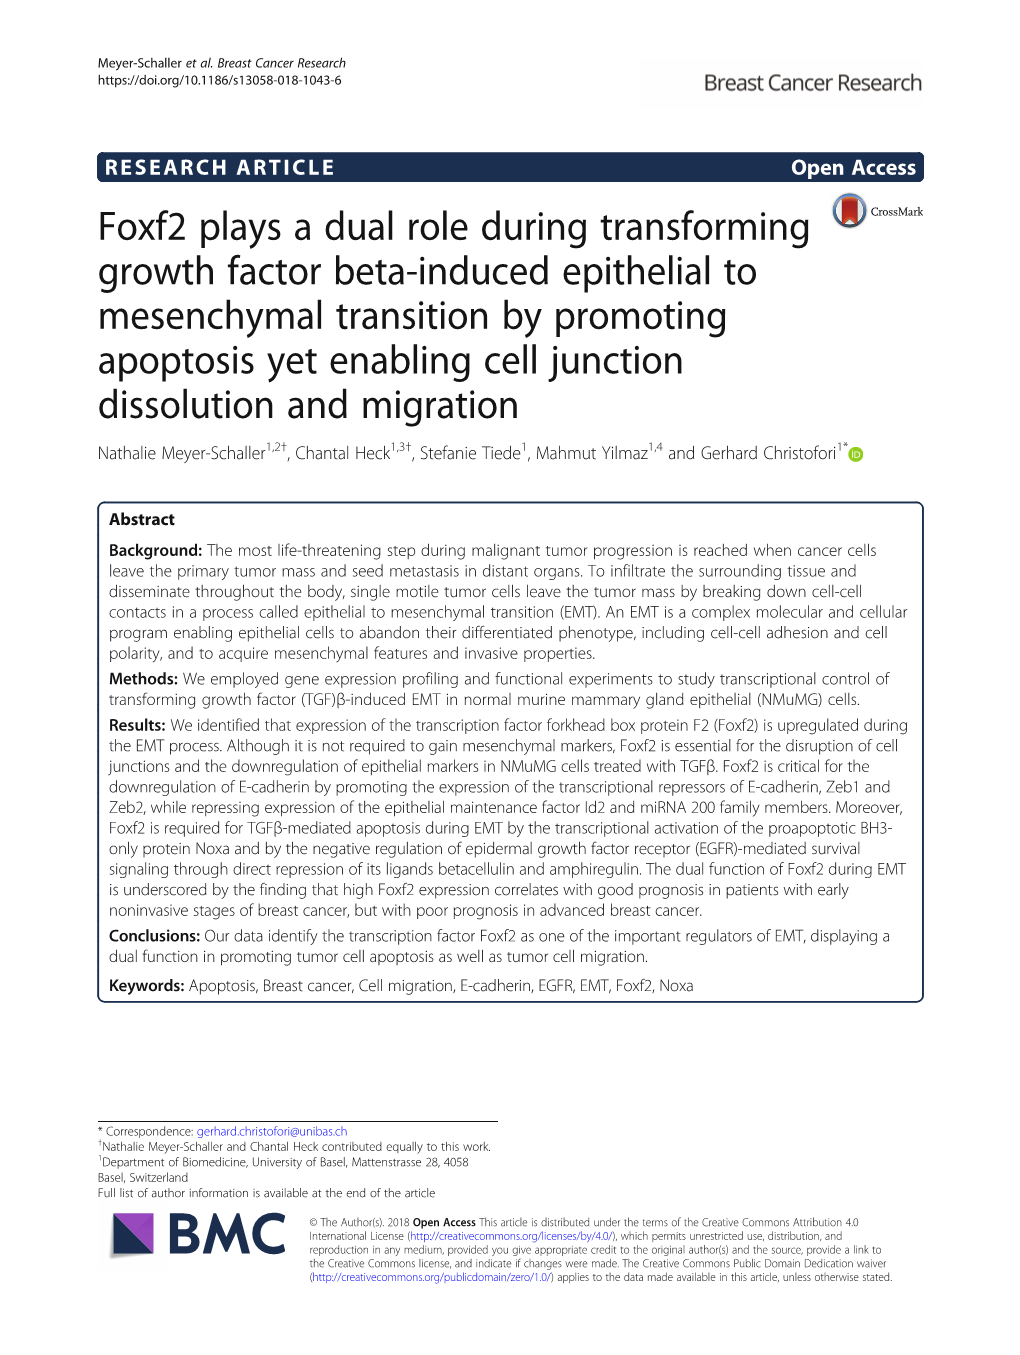 Foxf2 Plays a Dual Role During Transforming Growth Factor Beta